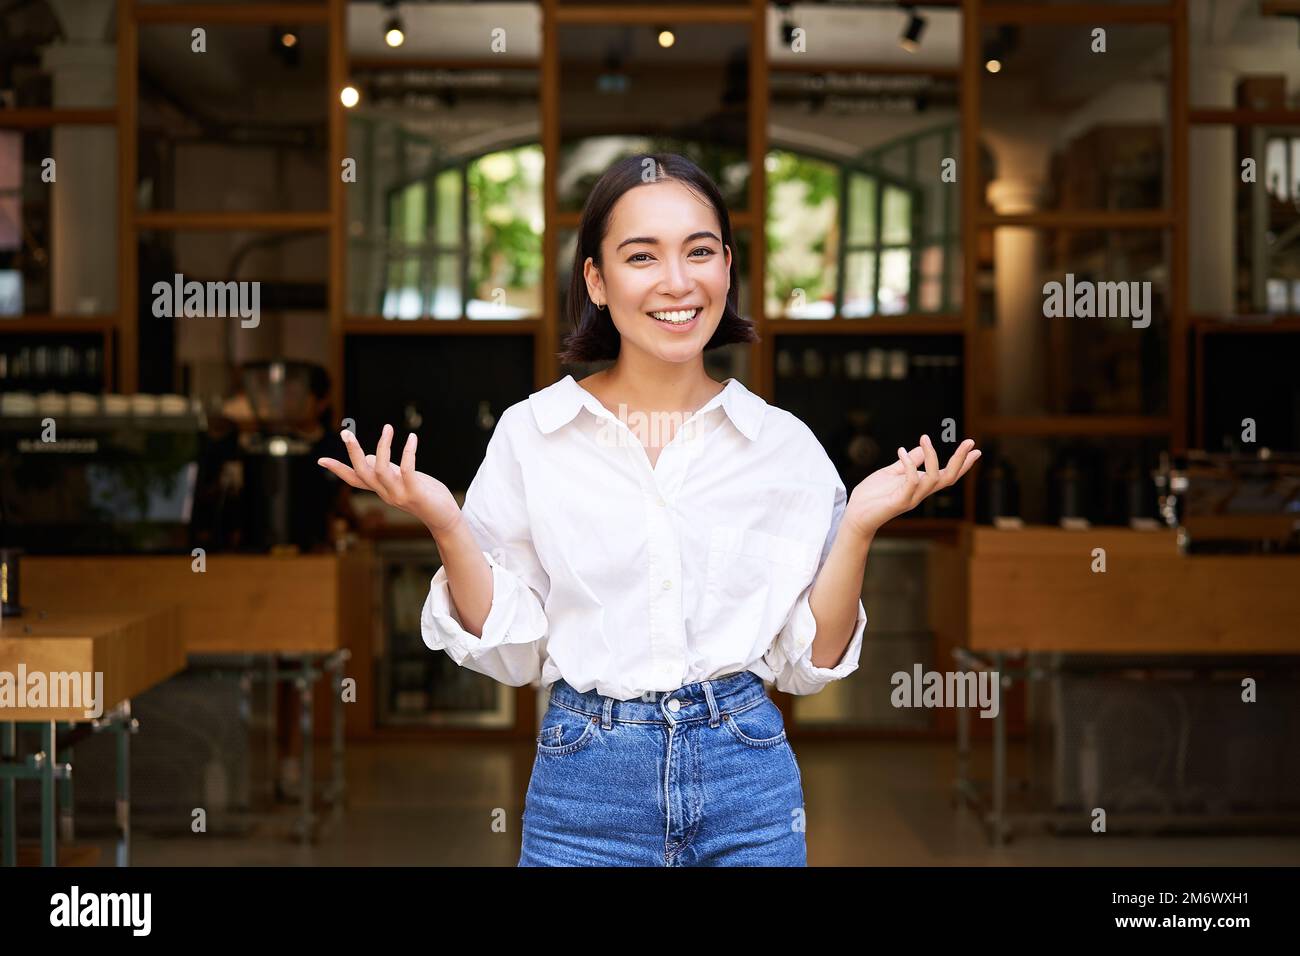 Enthusiastic young businesswoman, asian girl showing her business, raising hands up and smiling, standing in front of restaurant Stock Photo